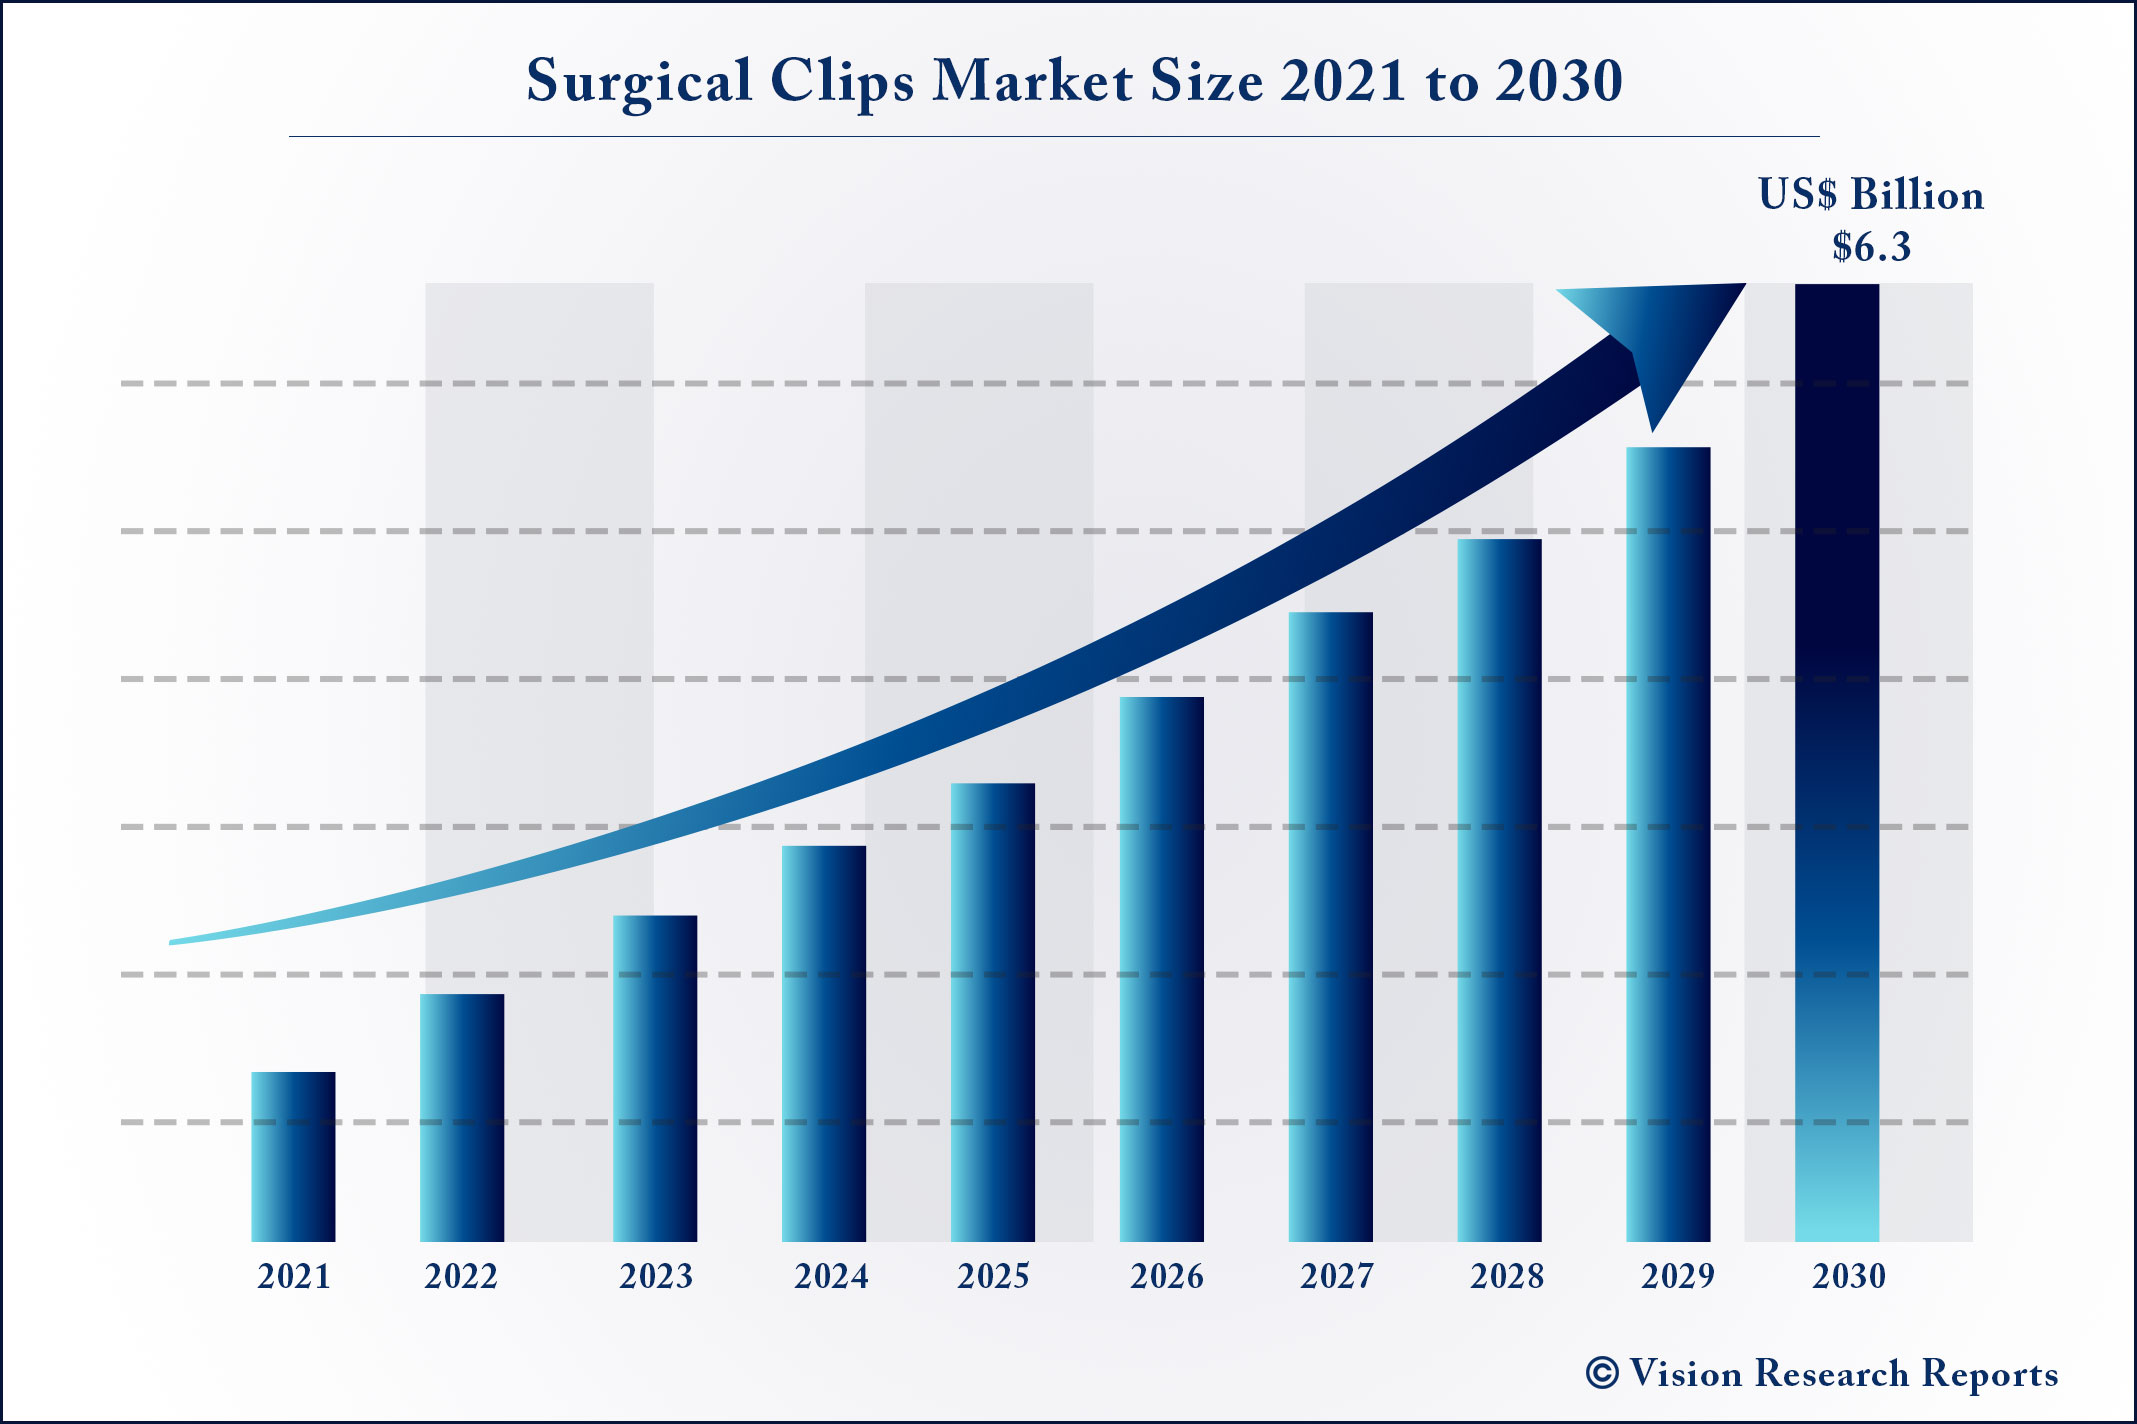 Surgical Clips Market Size 2021 to 2030